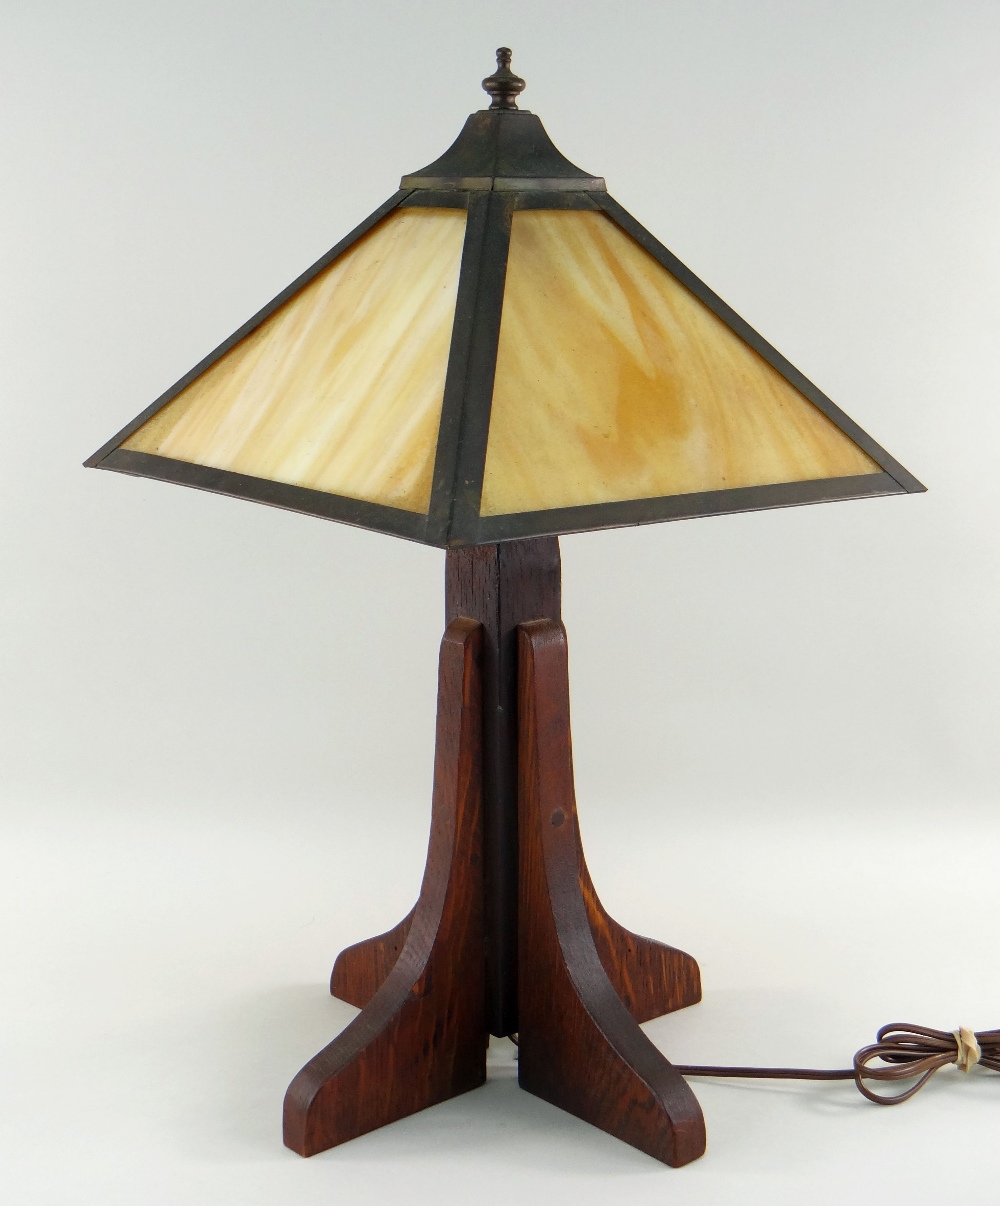 ARTS & CRAFTS MISSION-STYLE OAK TABLE LAMP, with pyramidal opaque glass shade, on a cruciform